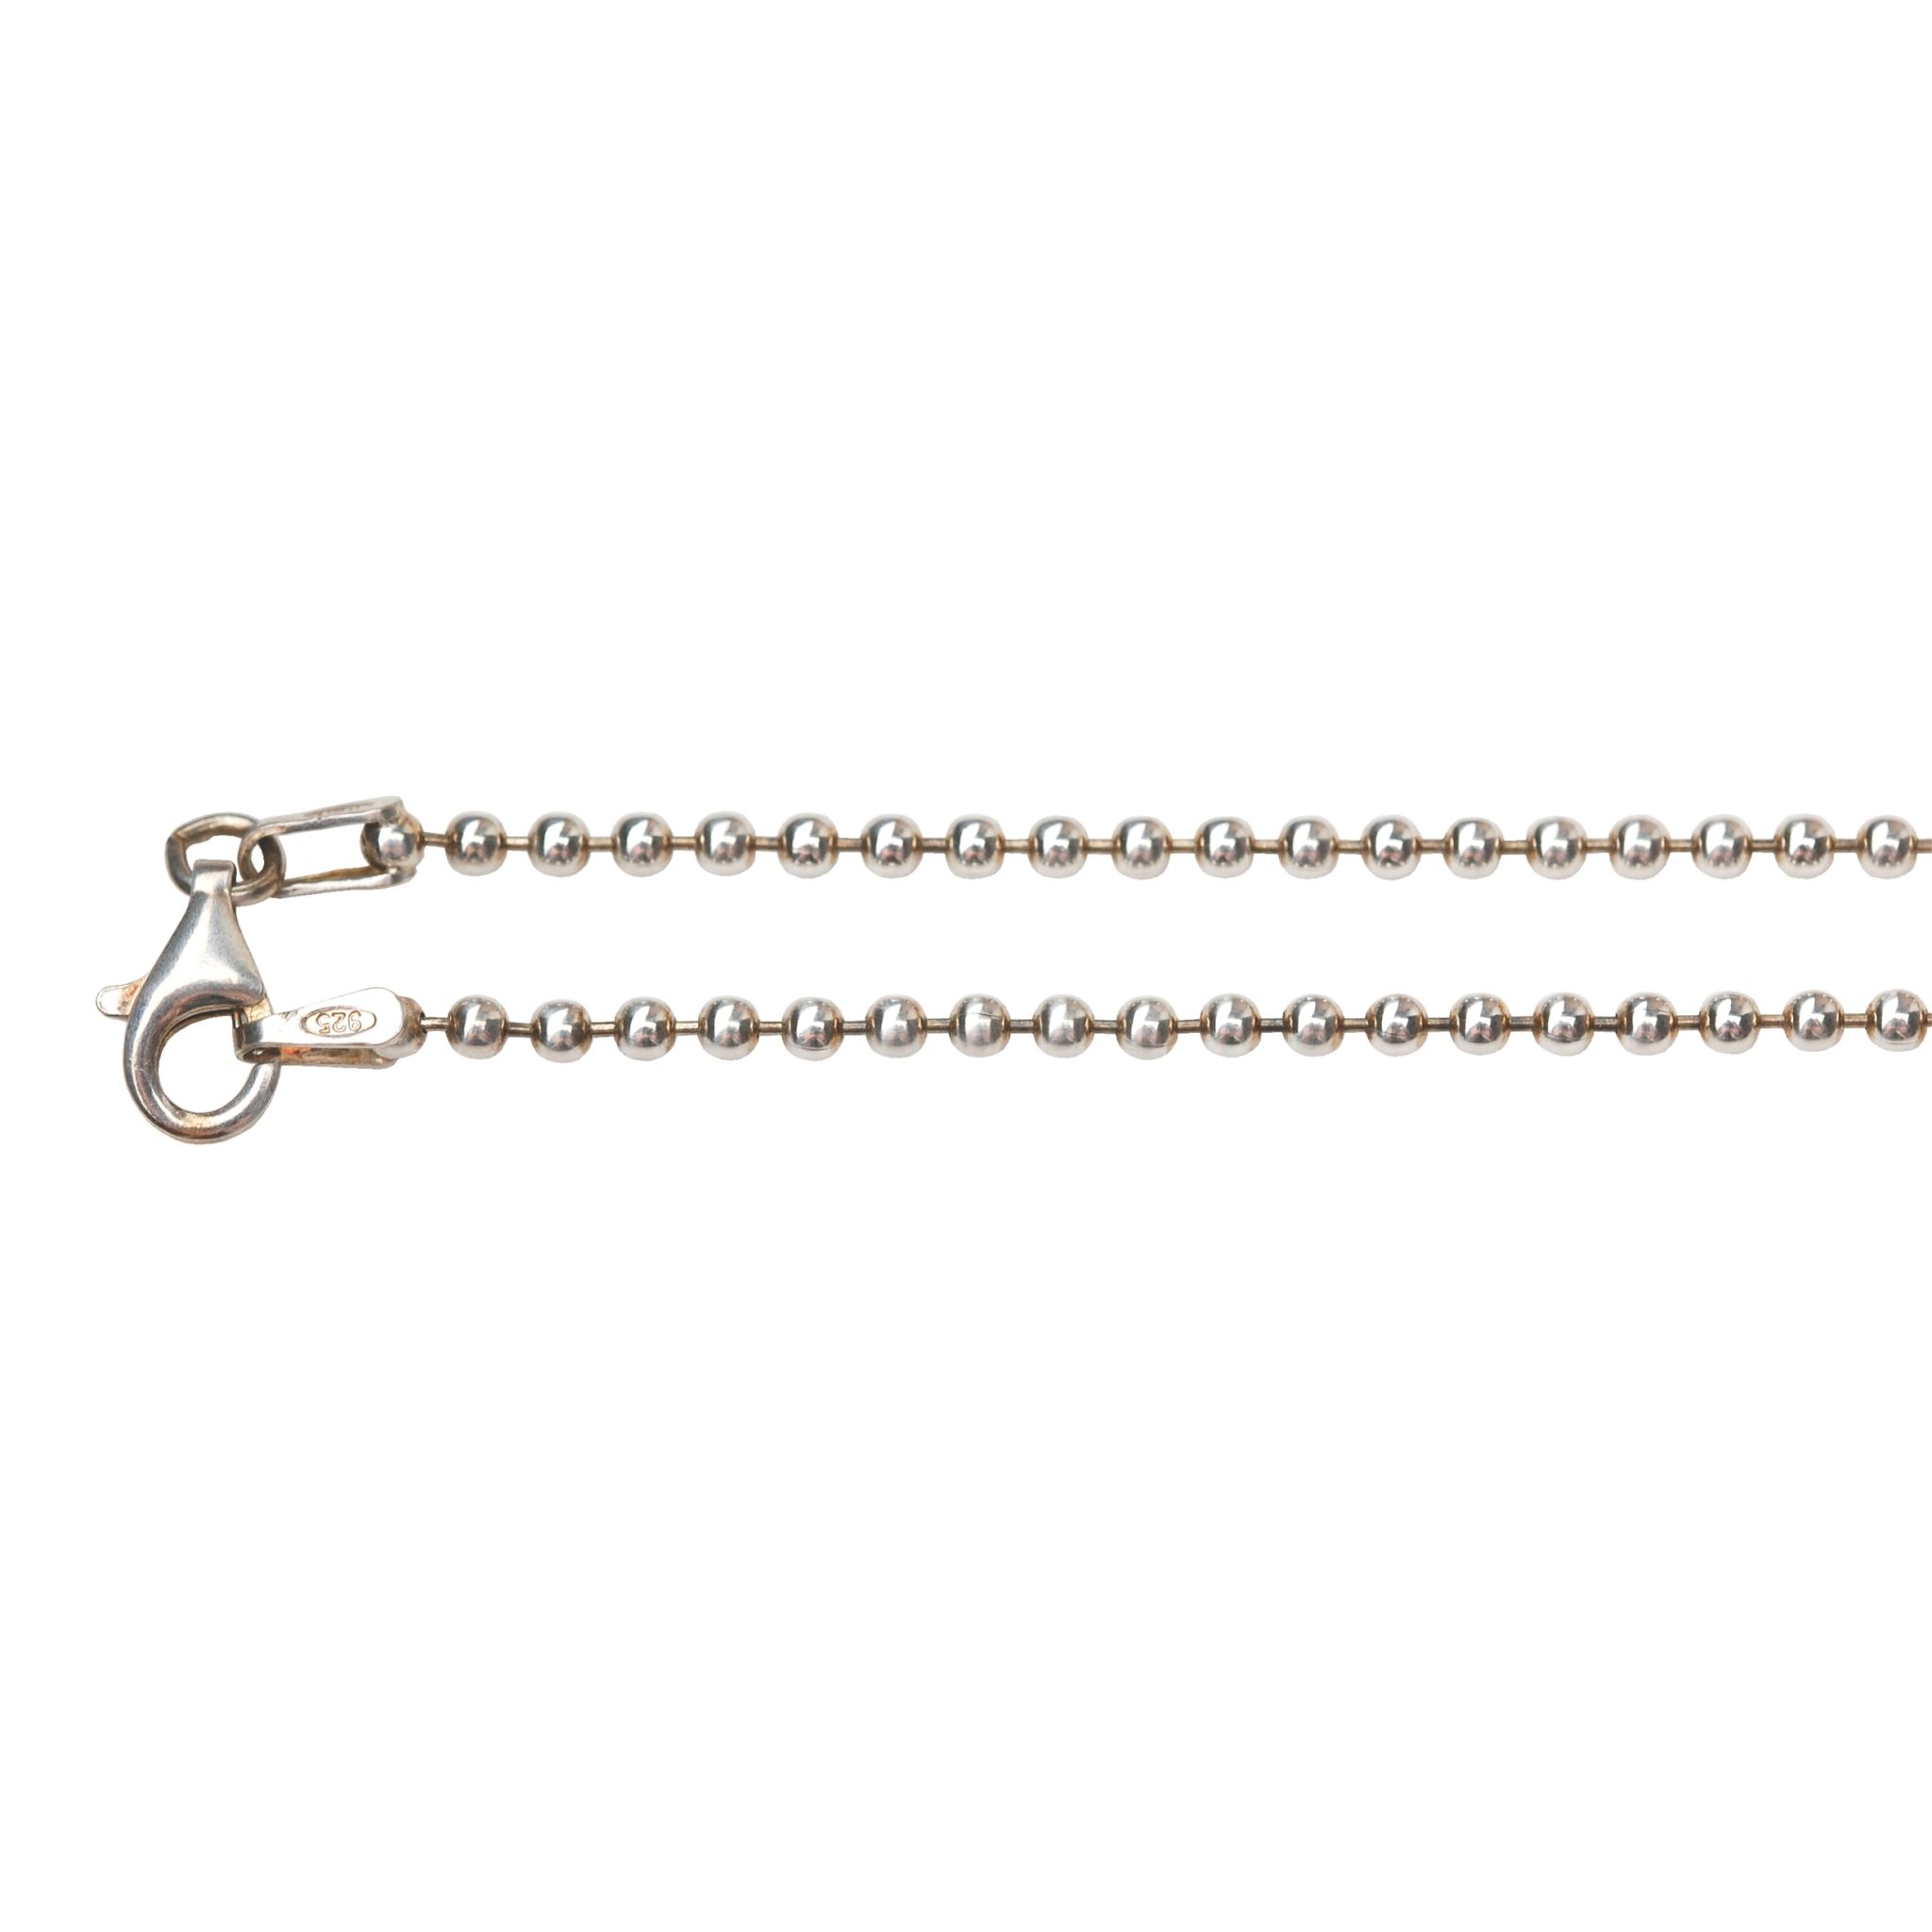 Sterling silver chain with 3mm balls